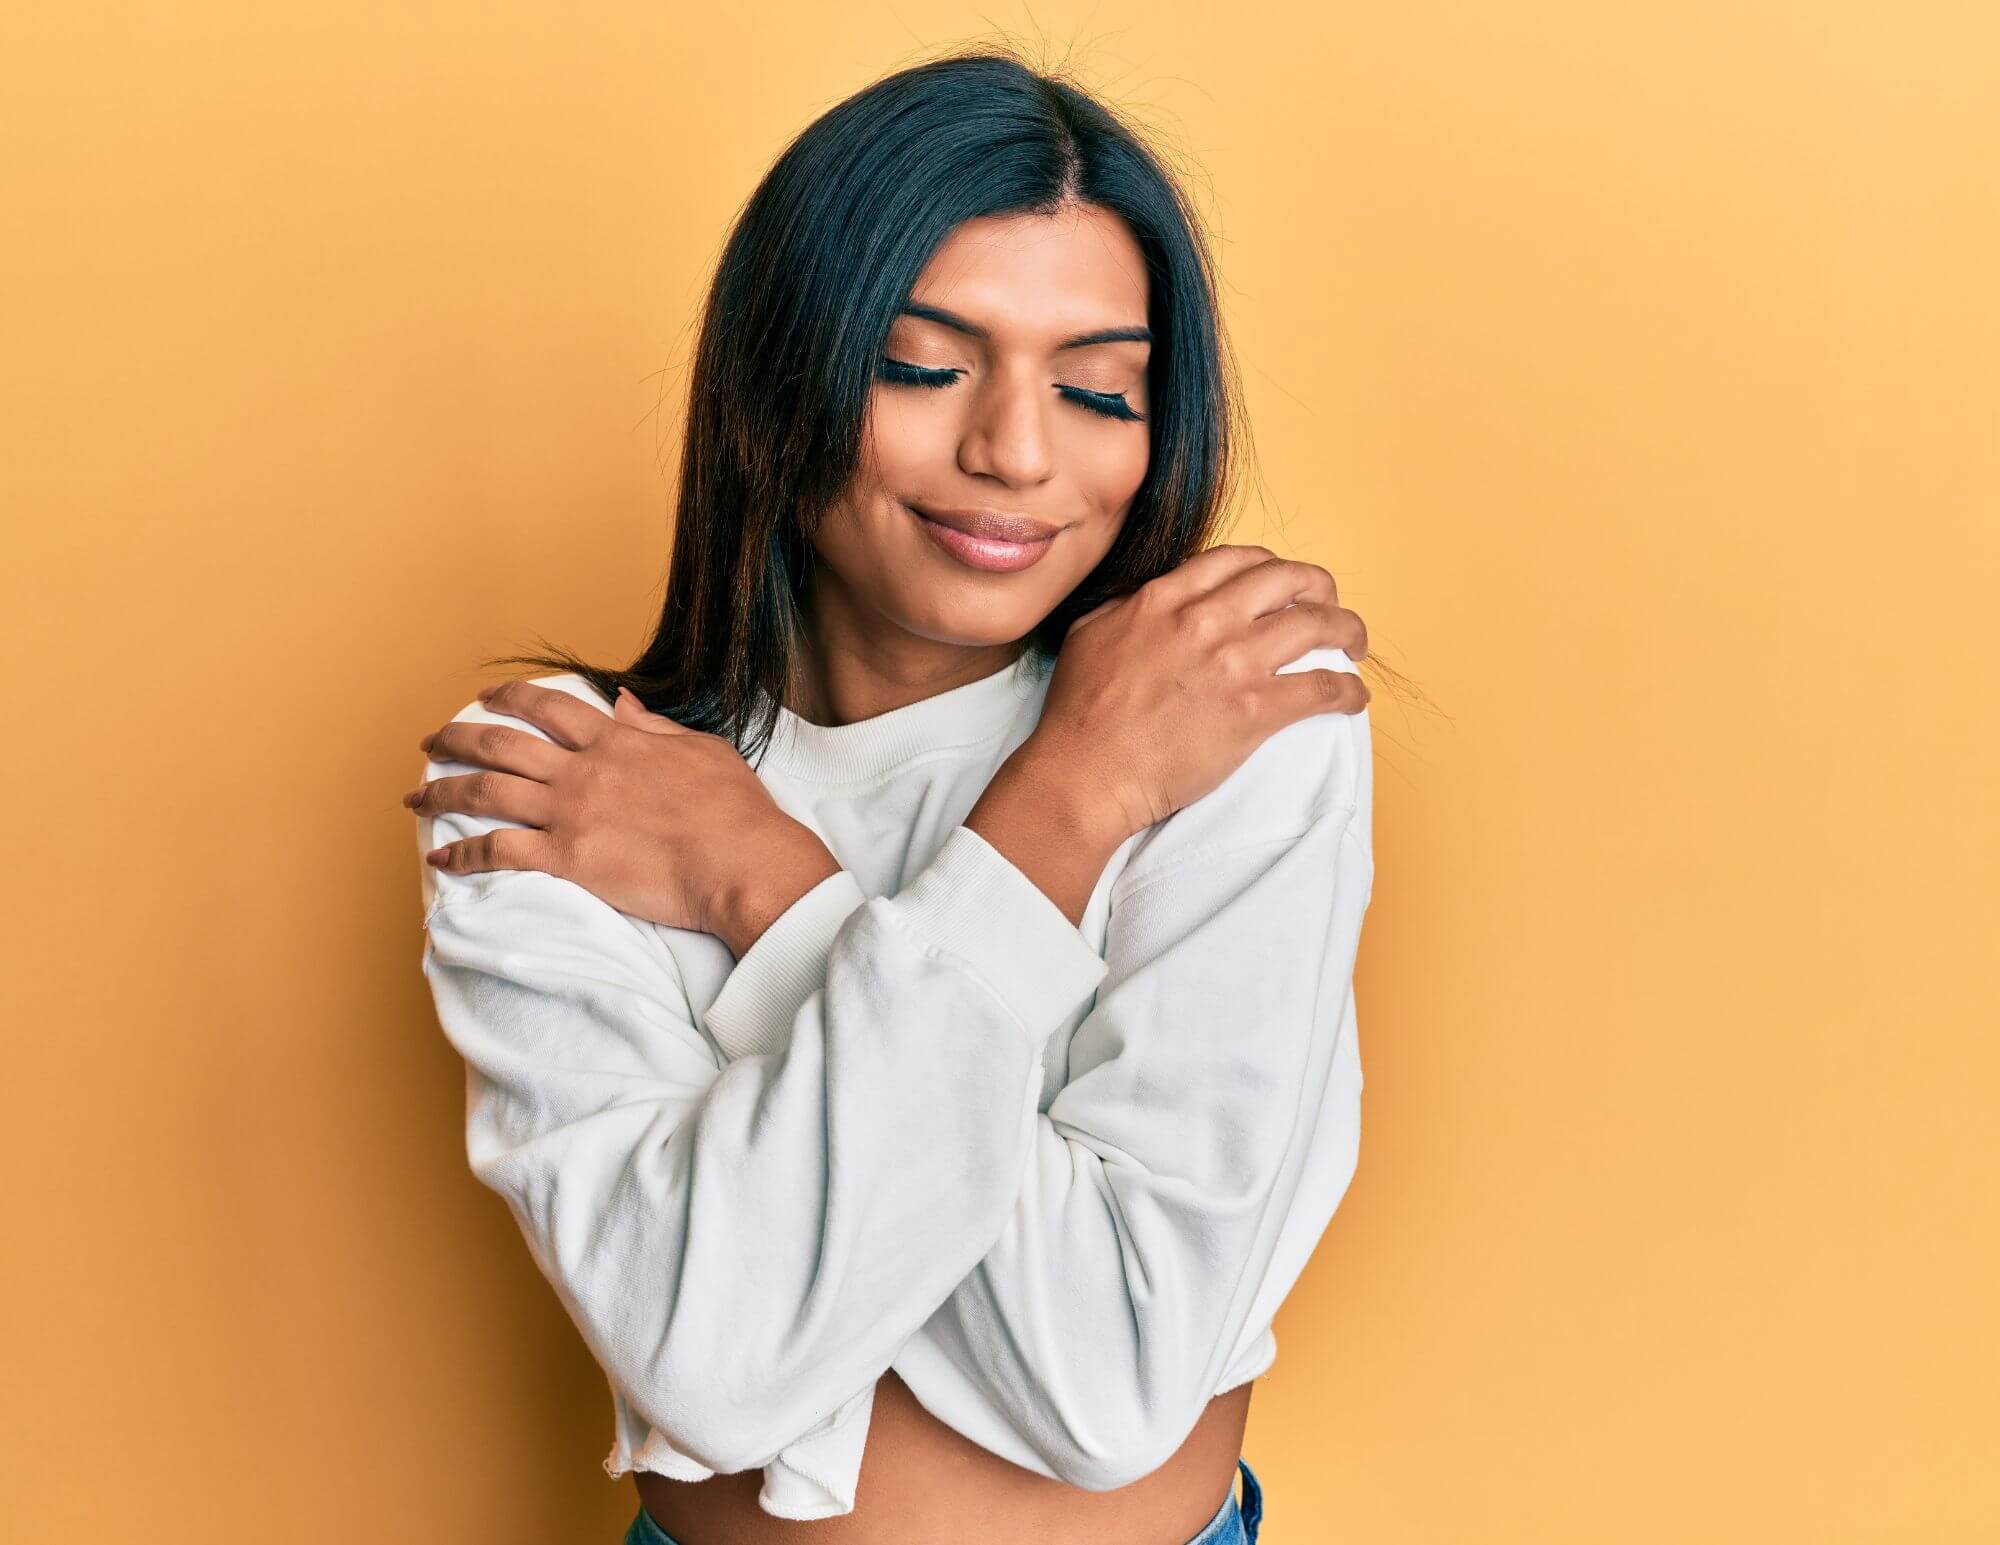 A South Asian woman hugging herself with her eyes closed and smiling